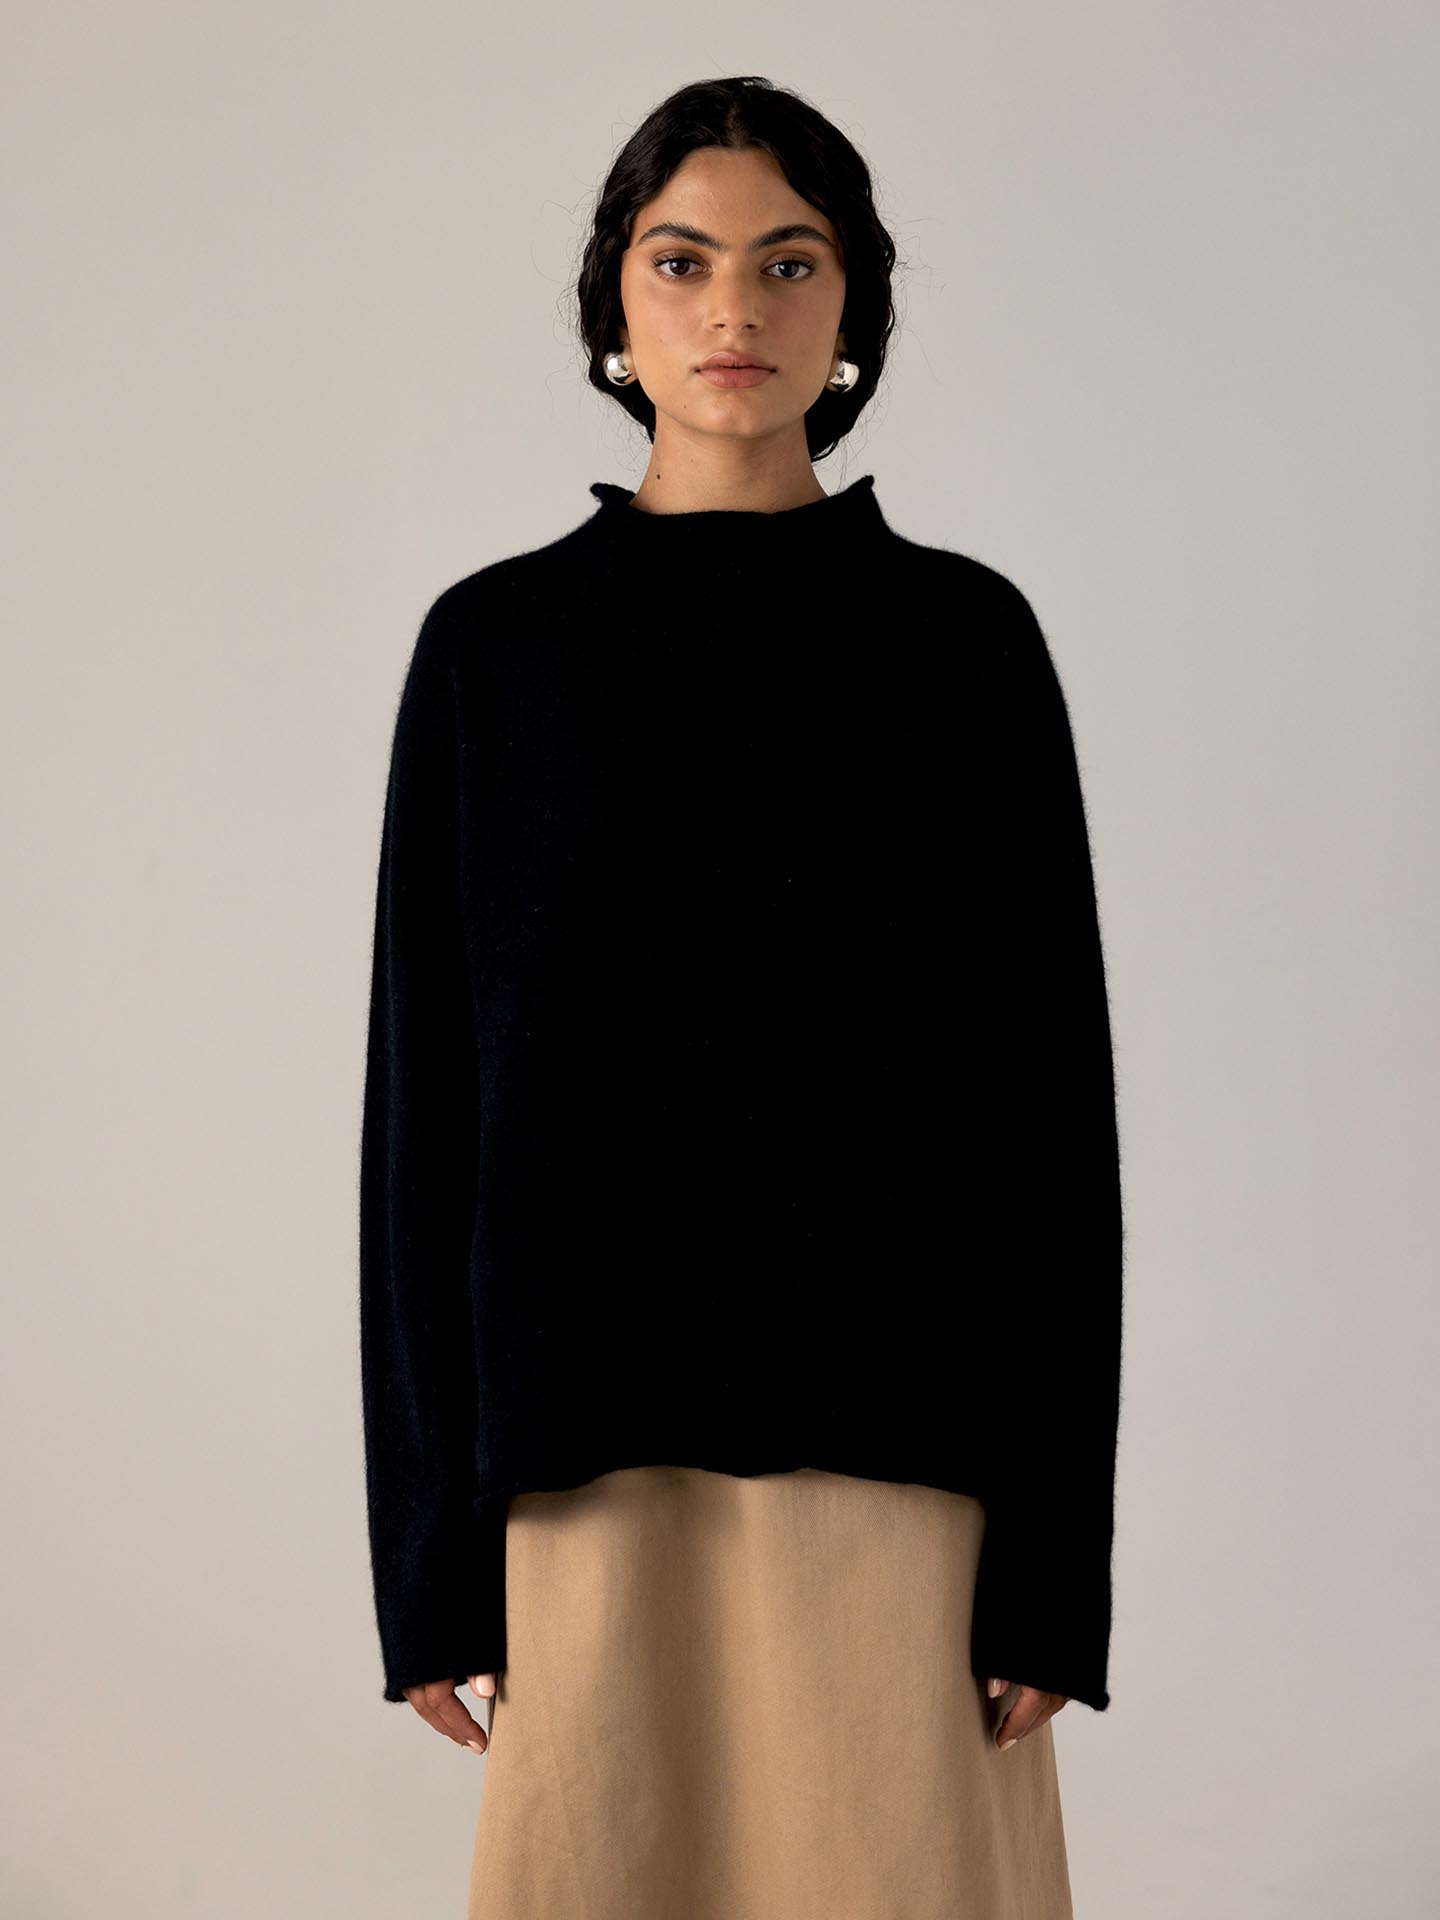 A petite woman with dark hair in a Francie Eclipse Knit – Black sweater and beige skirt stands against a neutral background, looking directly at the camera.